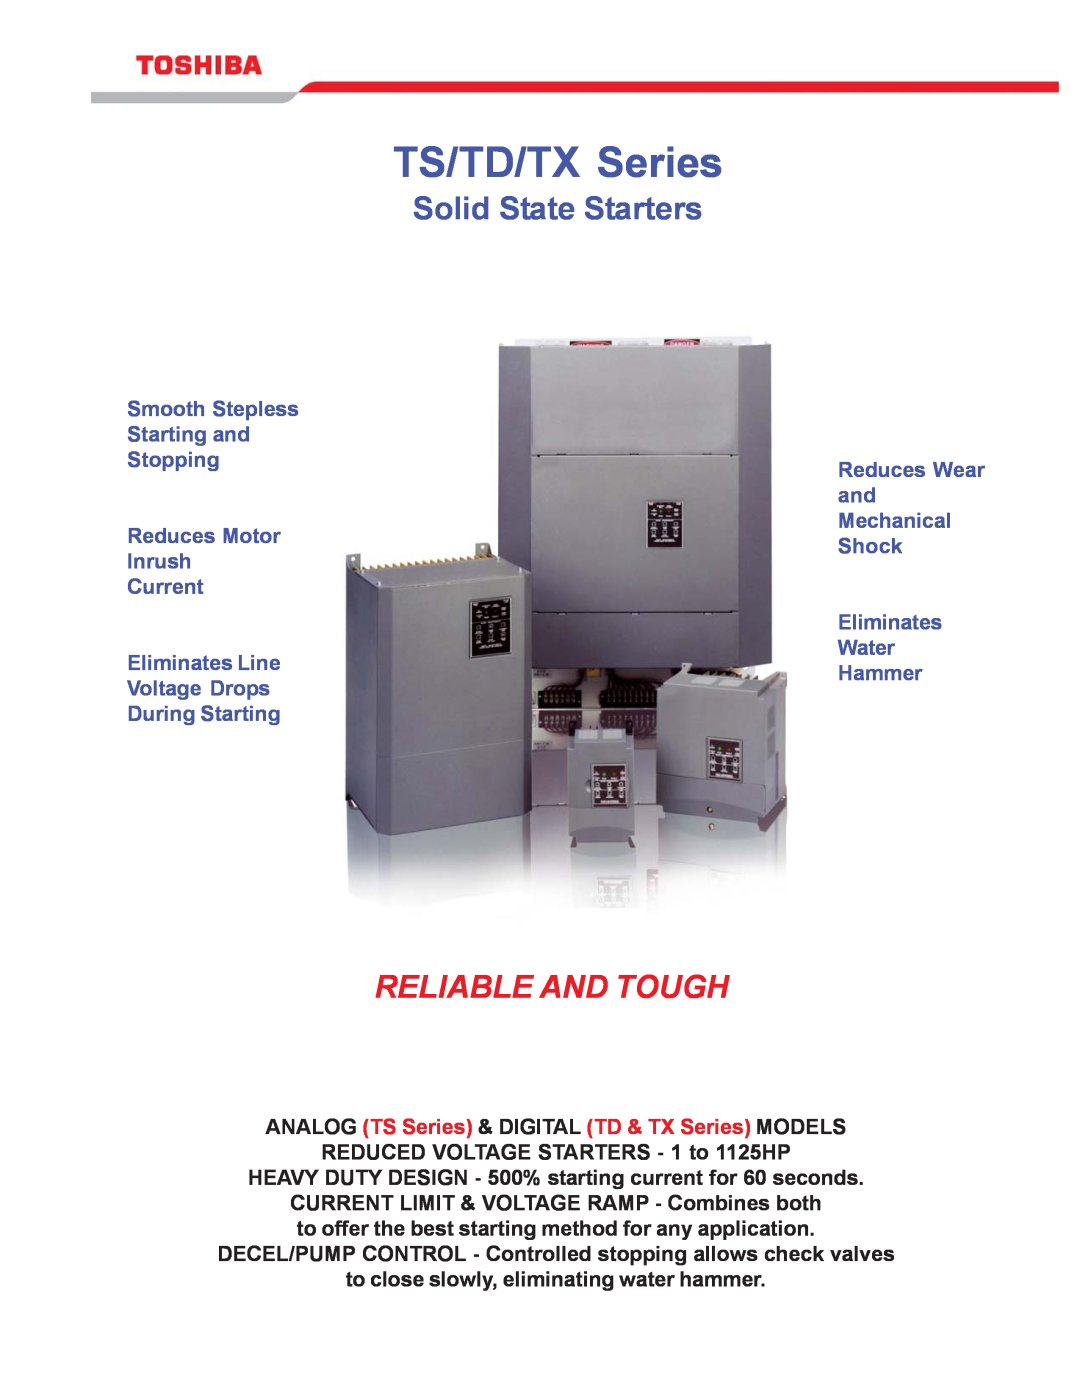 Toshiba TS Series manual TS/TD/TX Series, Solid State Starters, Reliable And Tough 